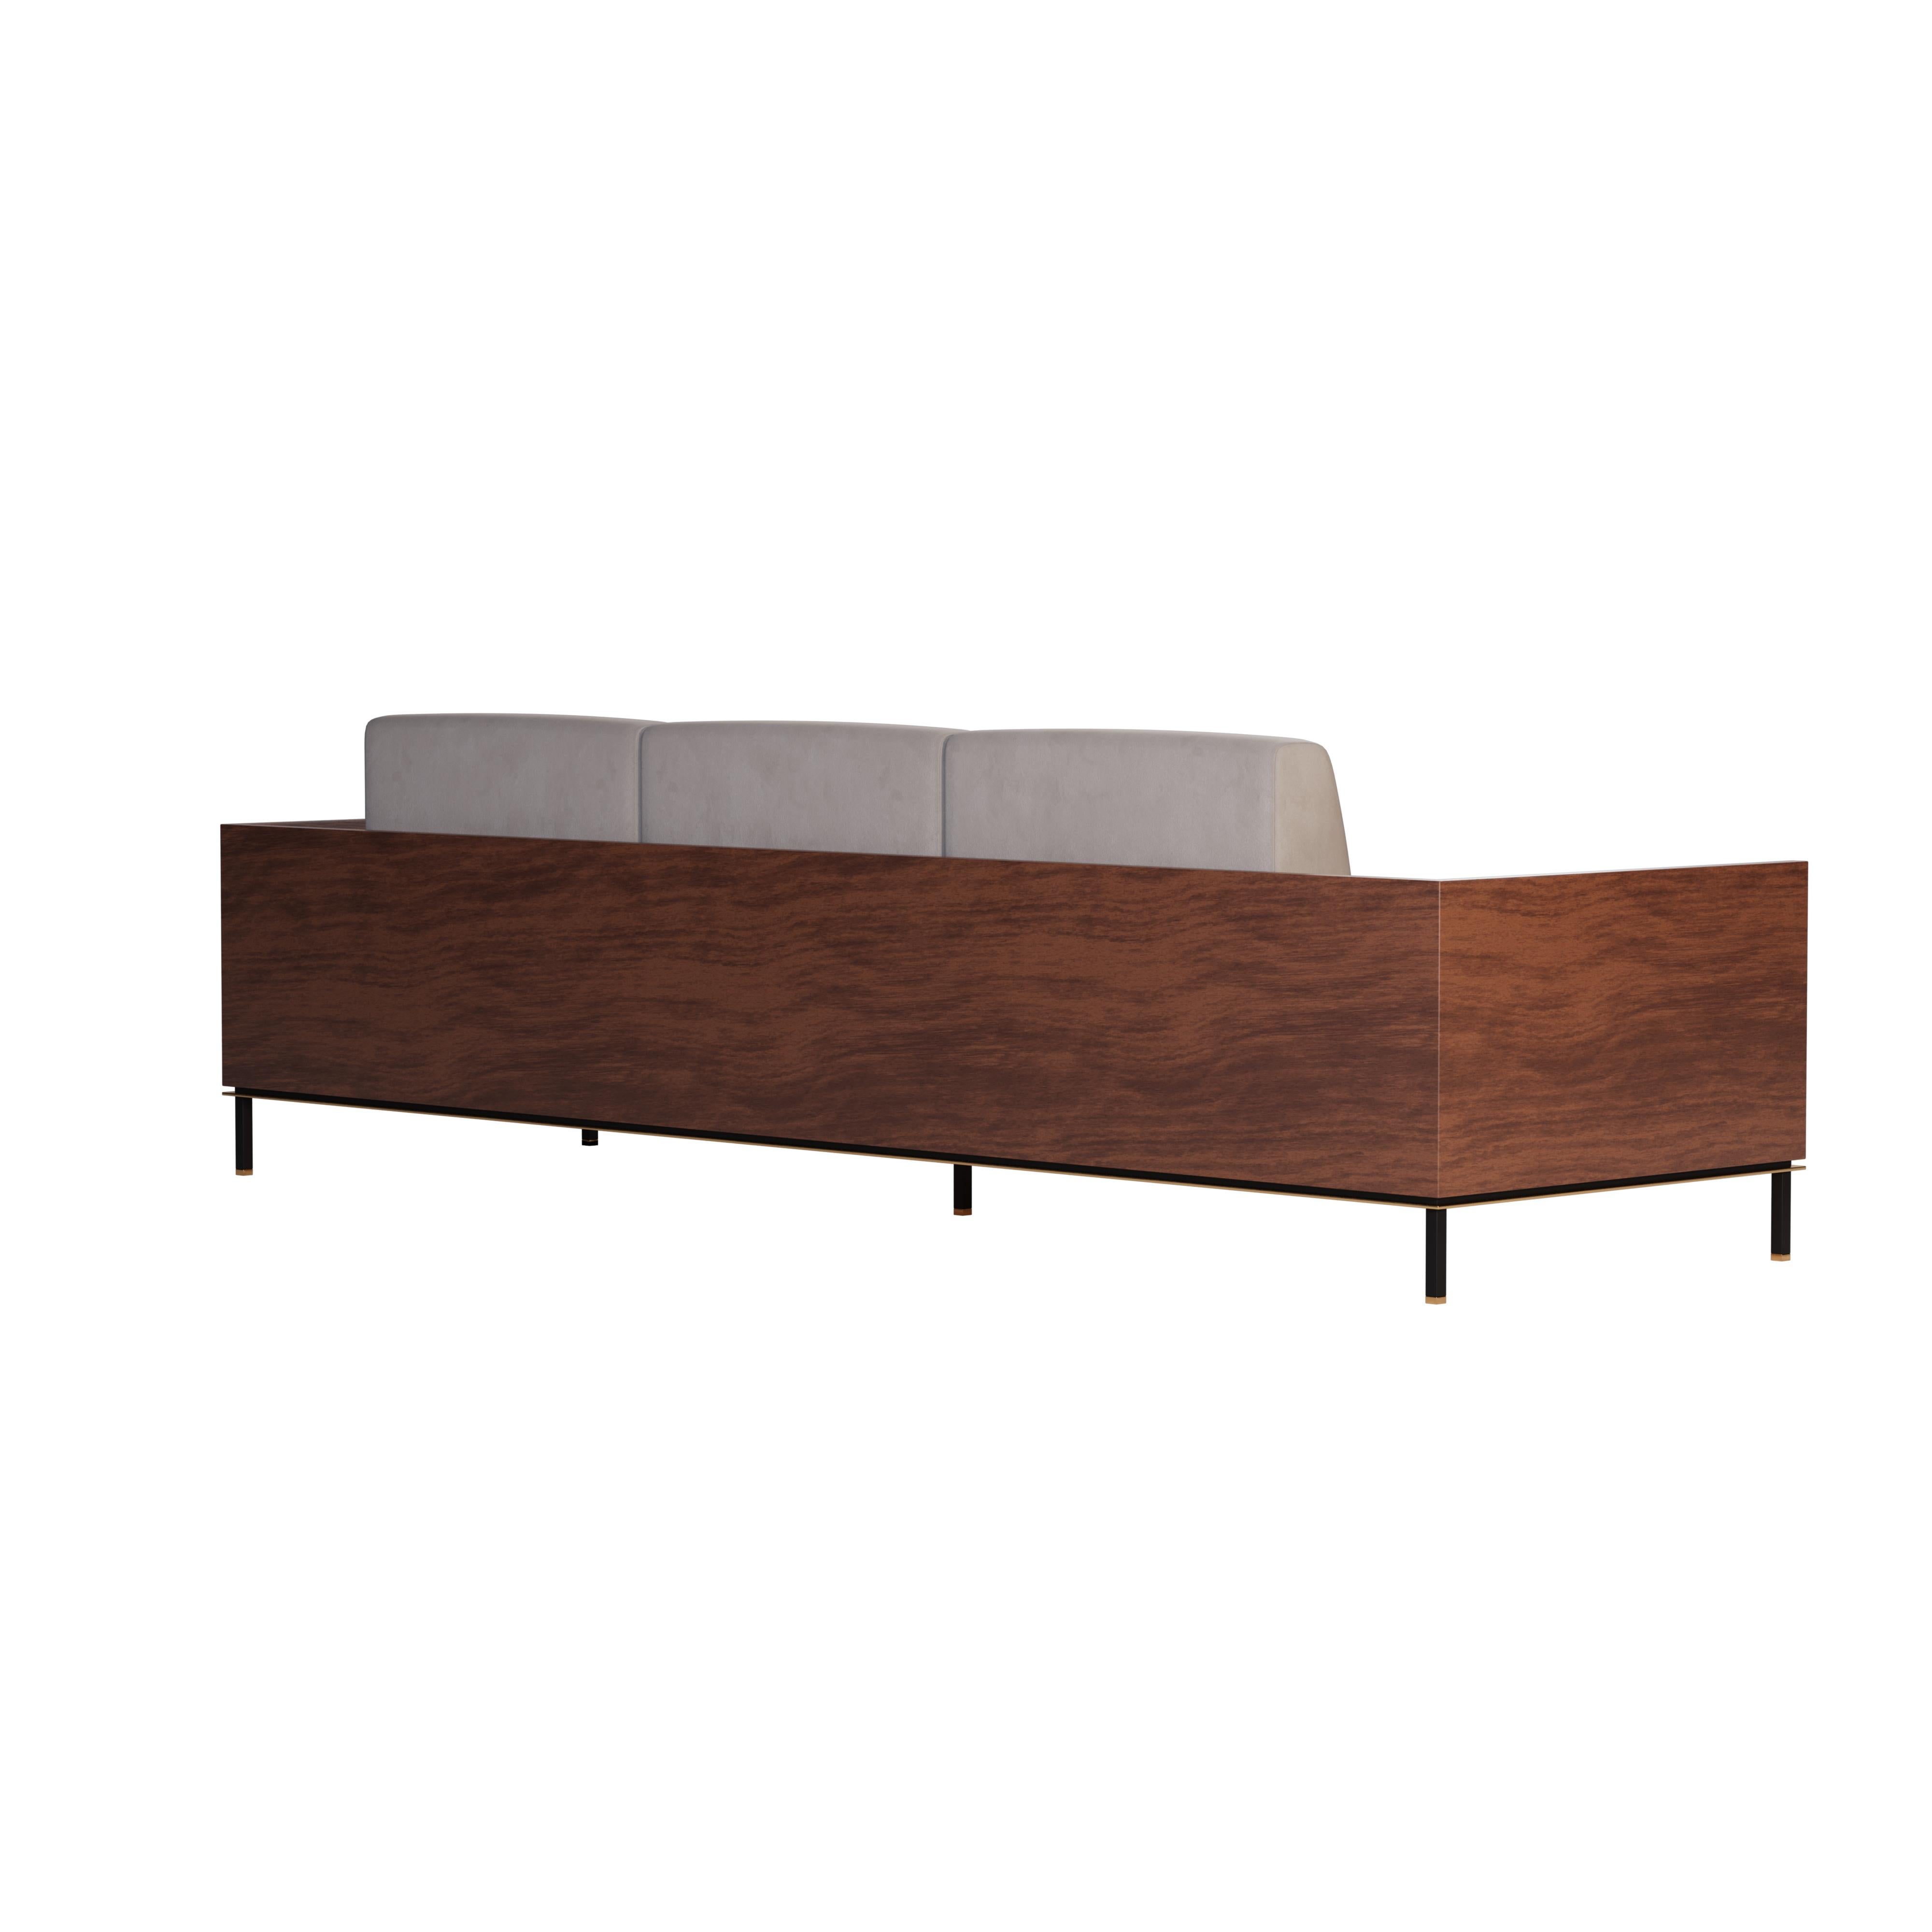 Portuguese 21st century Asheville I Sofa Smoked Walnut Leather Suede Brushed Brass For Sale